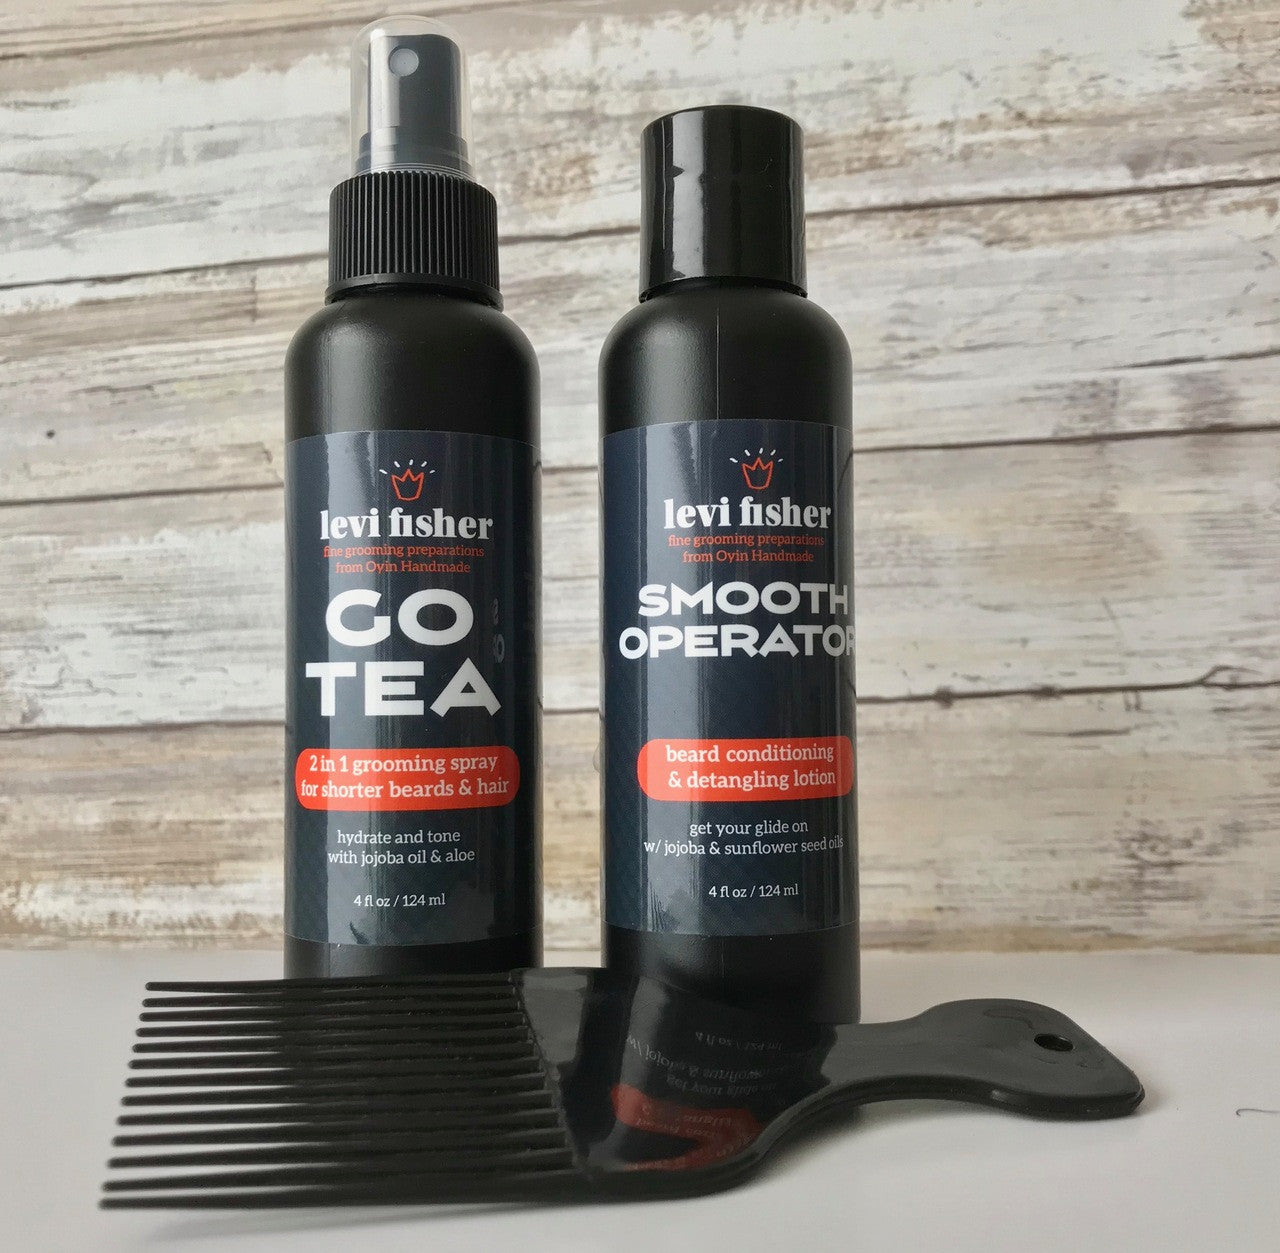 Choose one or both of our hydrating leave-ins. Smooth Operator is creamy and detangling, Go Tea is refreshing and hydrating.